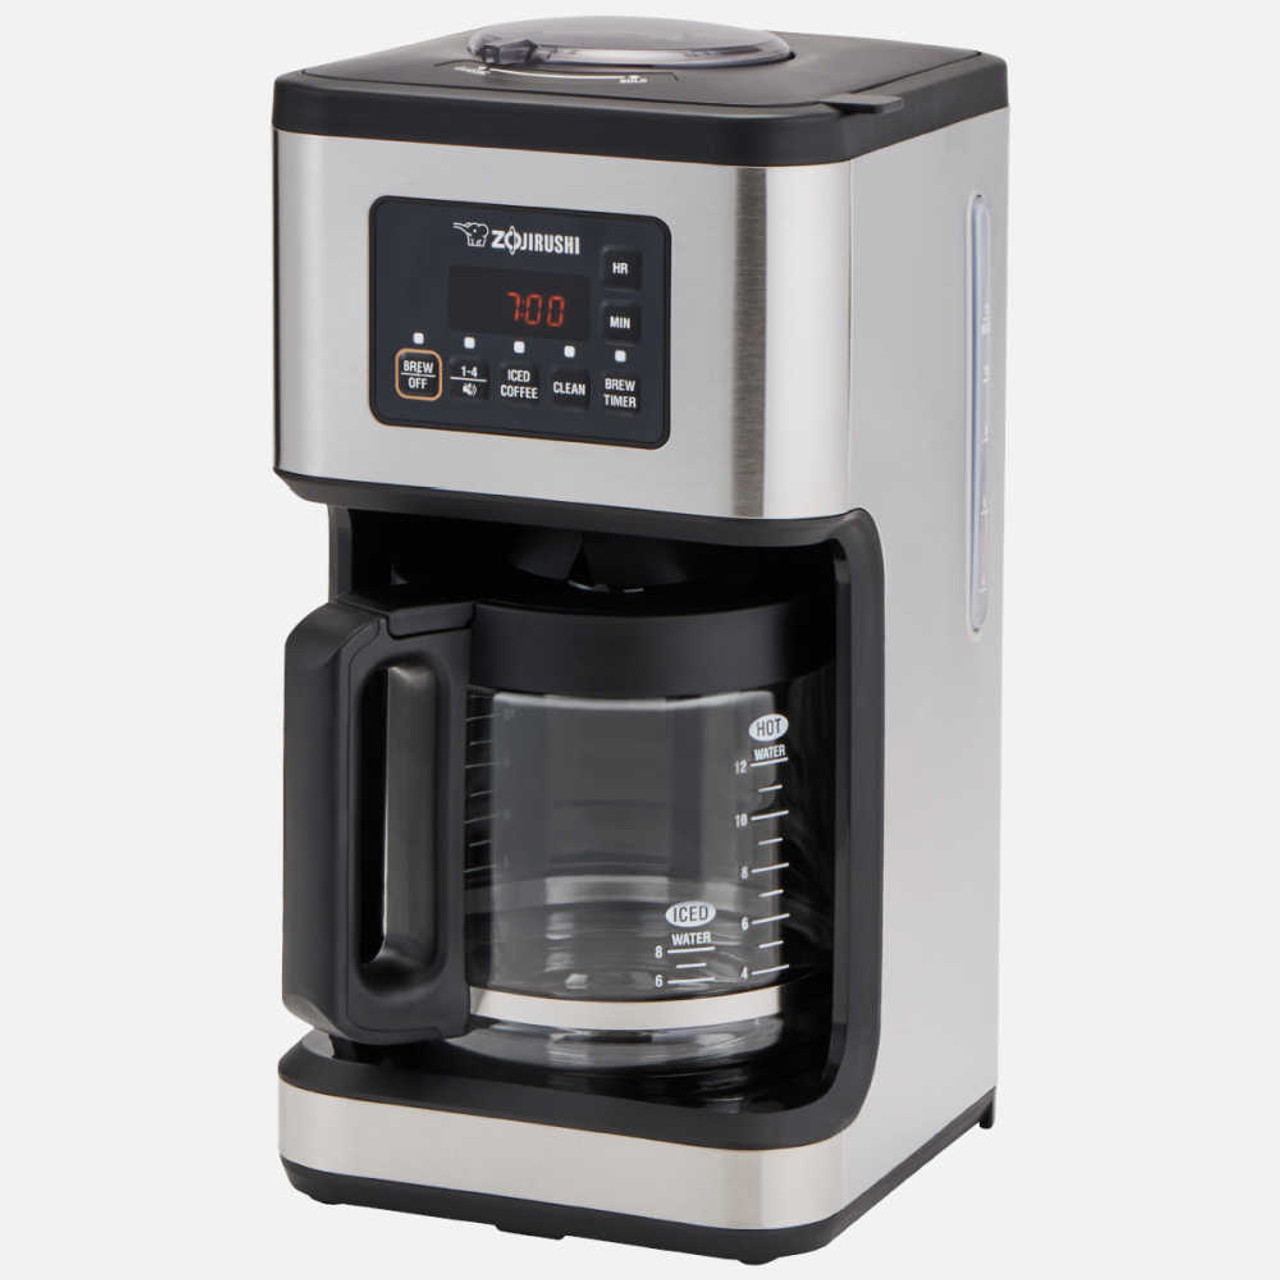 https://cdn11.bigcommerce.com/s-hccytny0od/images/stencil/1280x1280/products/5379/23356/Zojirushi_Dome_Brew_Classic_Coffee_Maker__20826.1681233635.jpg?c=2?imbypass=on